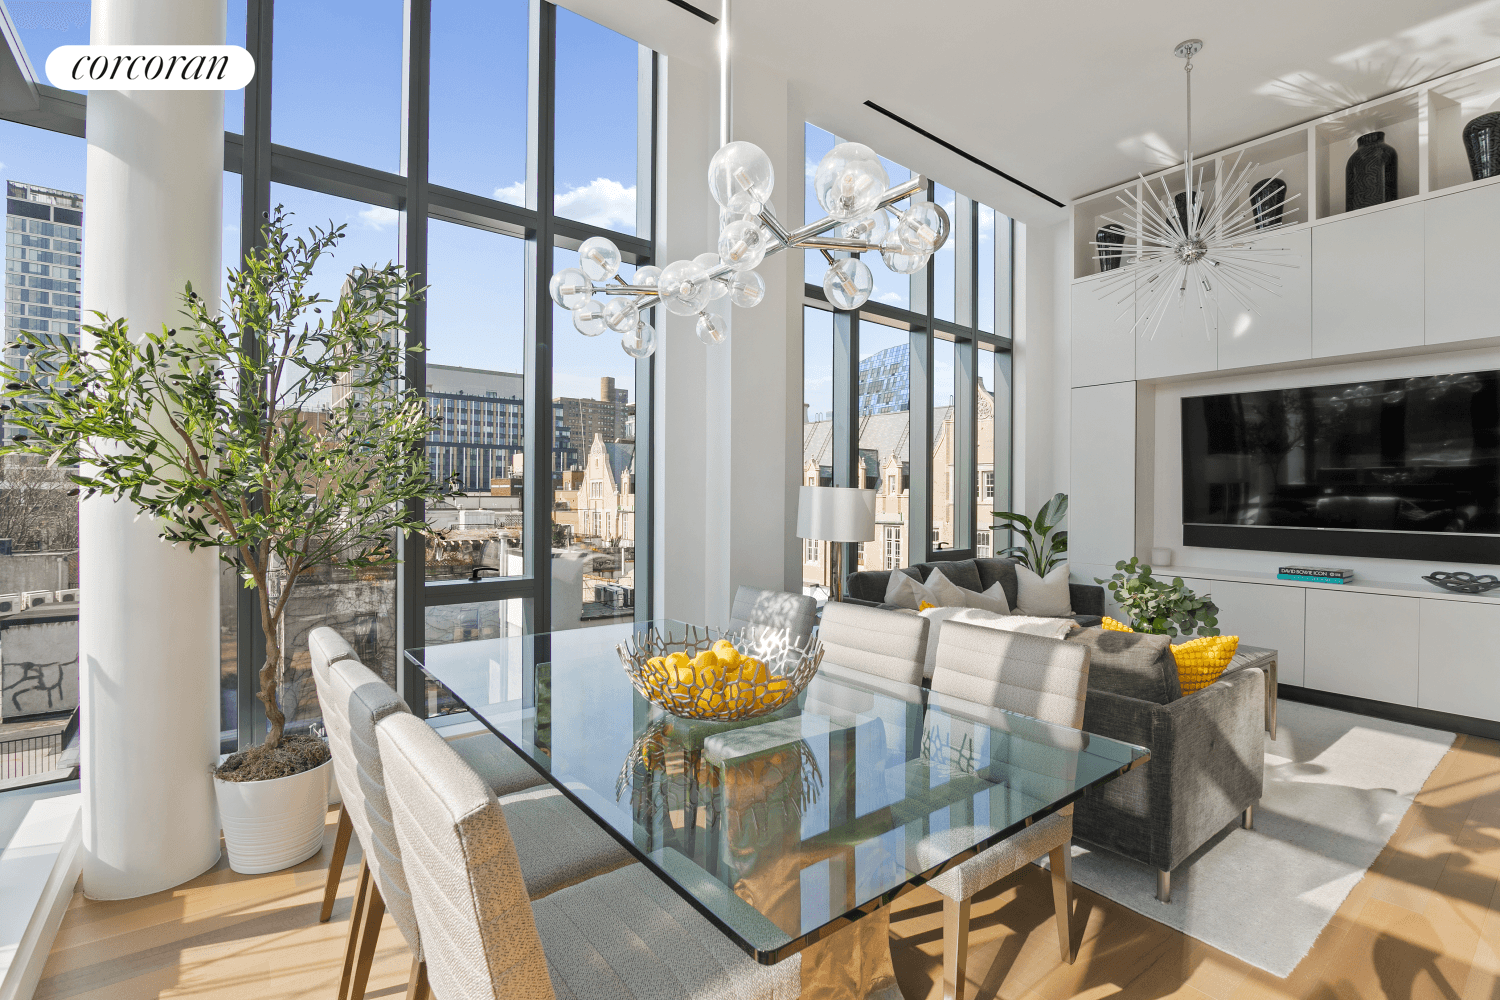 This Penthouse residence at 150 Rivington Street offers an unparalleled living experience in the heart of the Lower East Side.